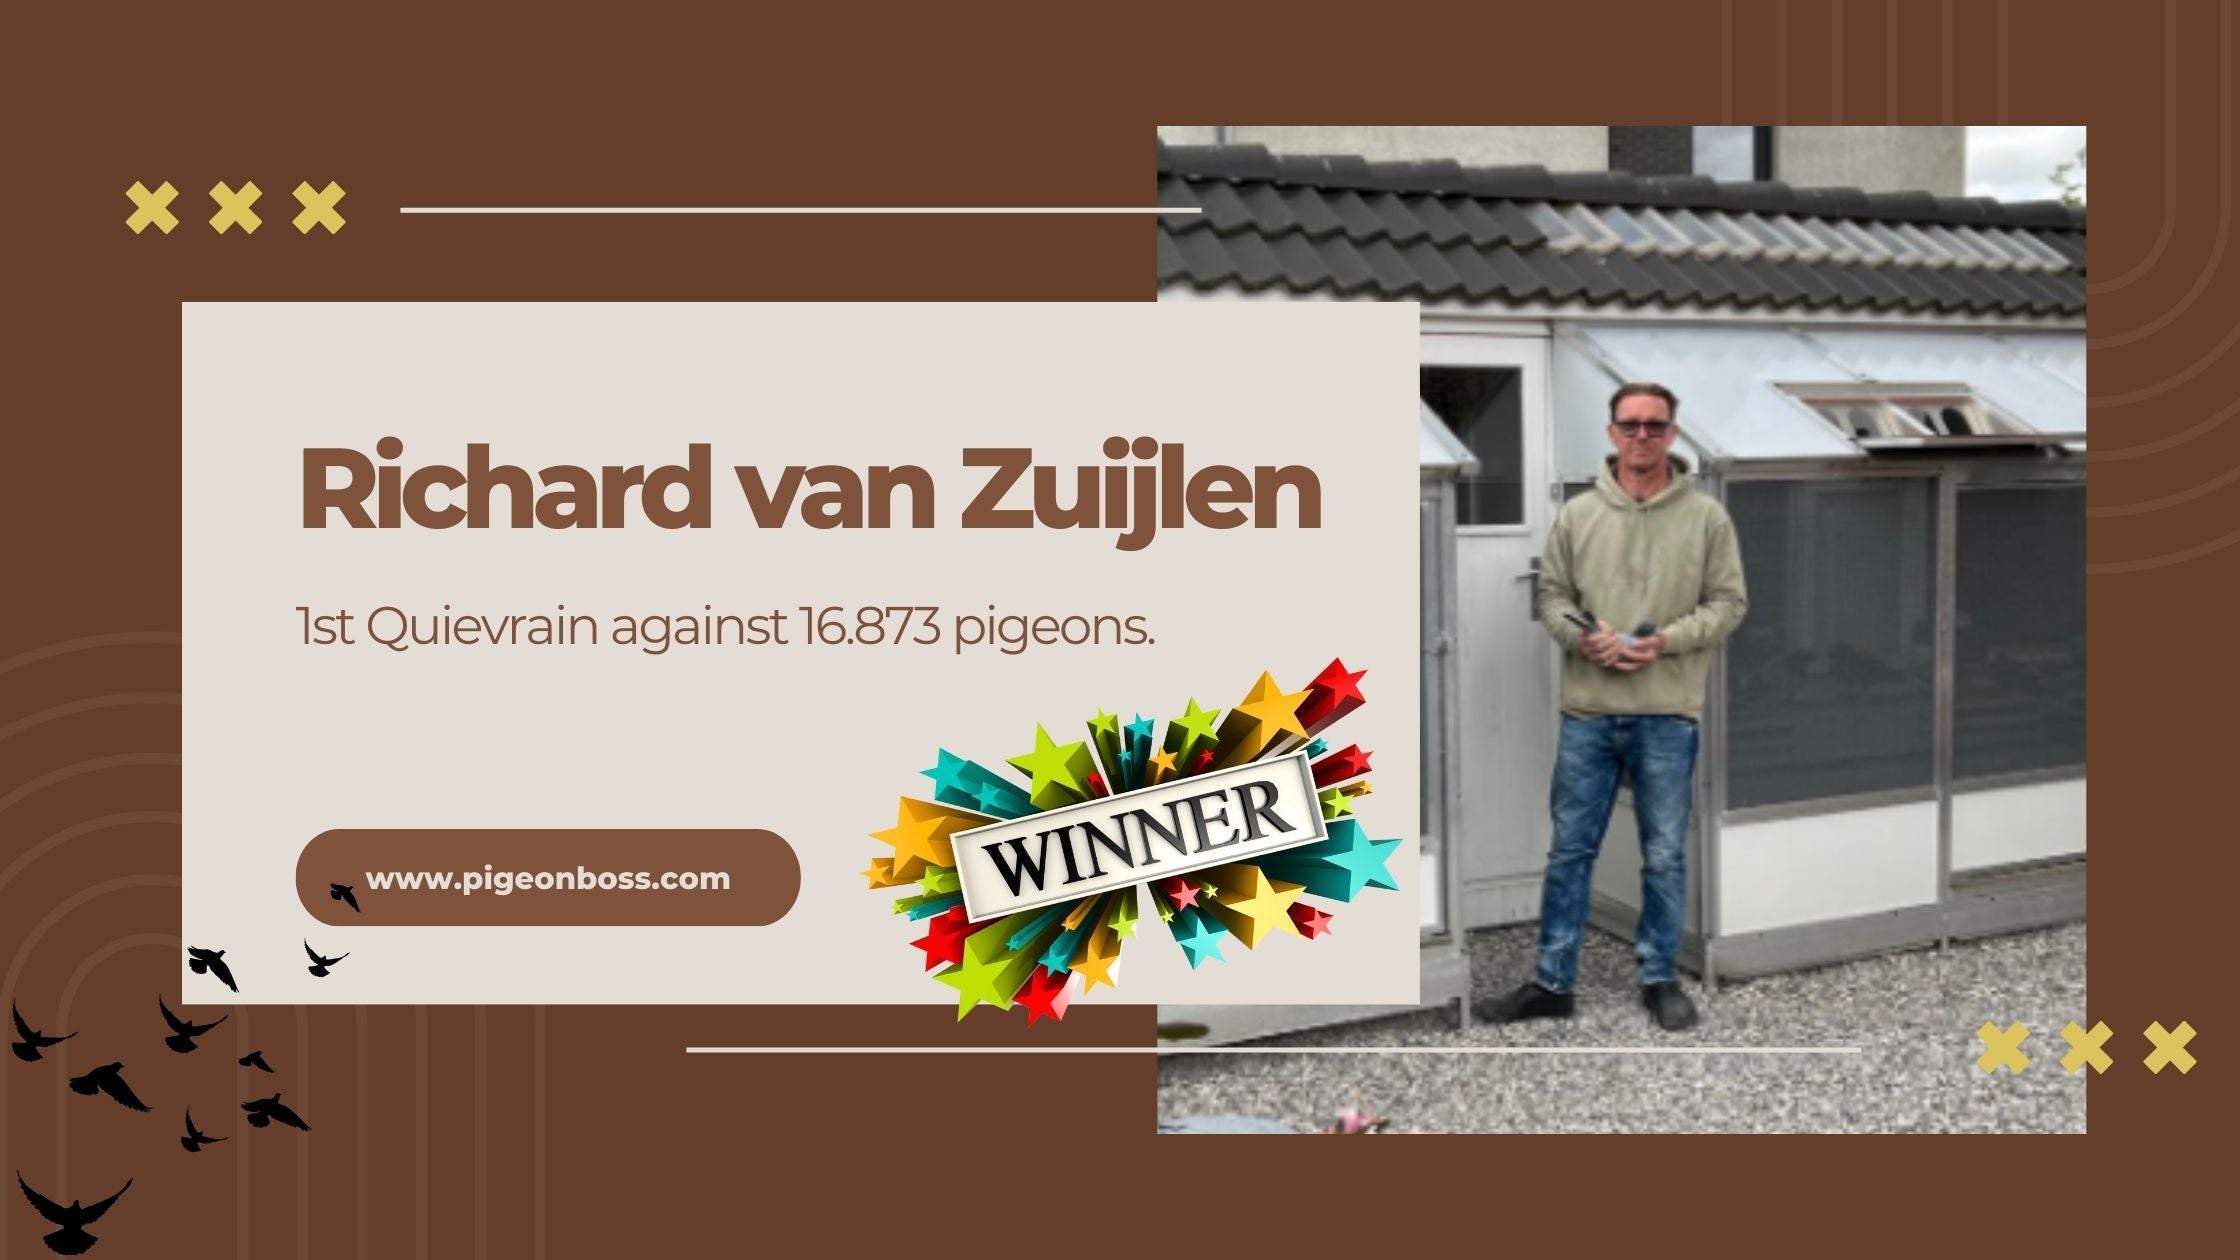 Wings of Triumph: How Richard van Zuijlen Conquered the Pigeon Racing World on King's Day